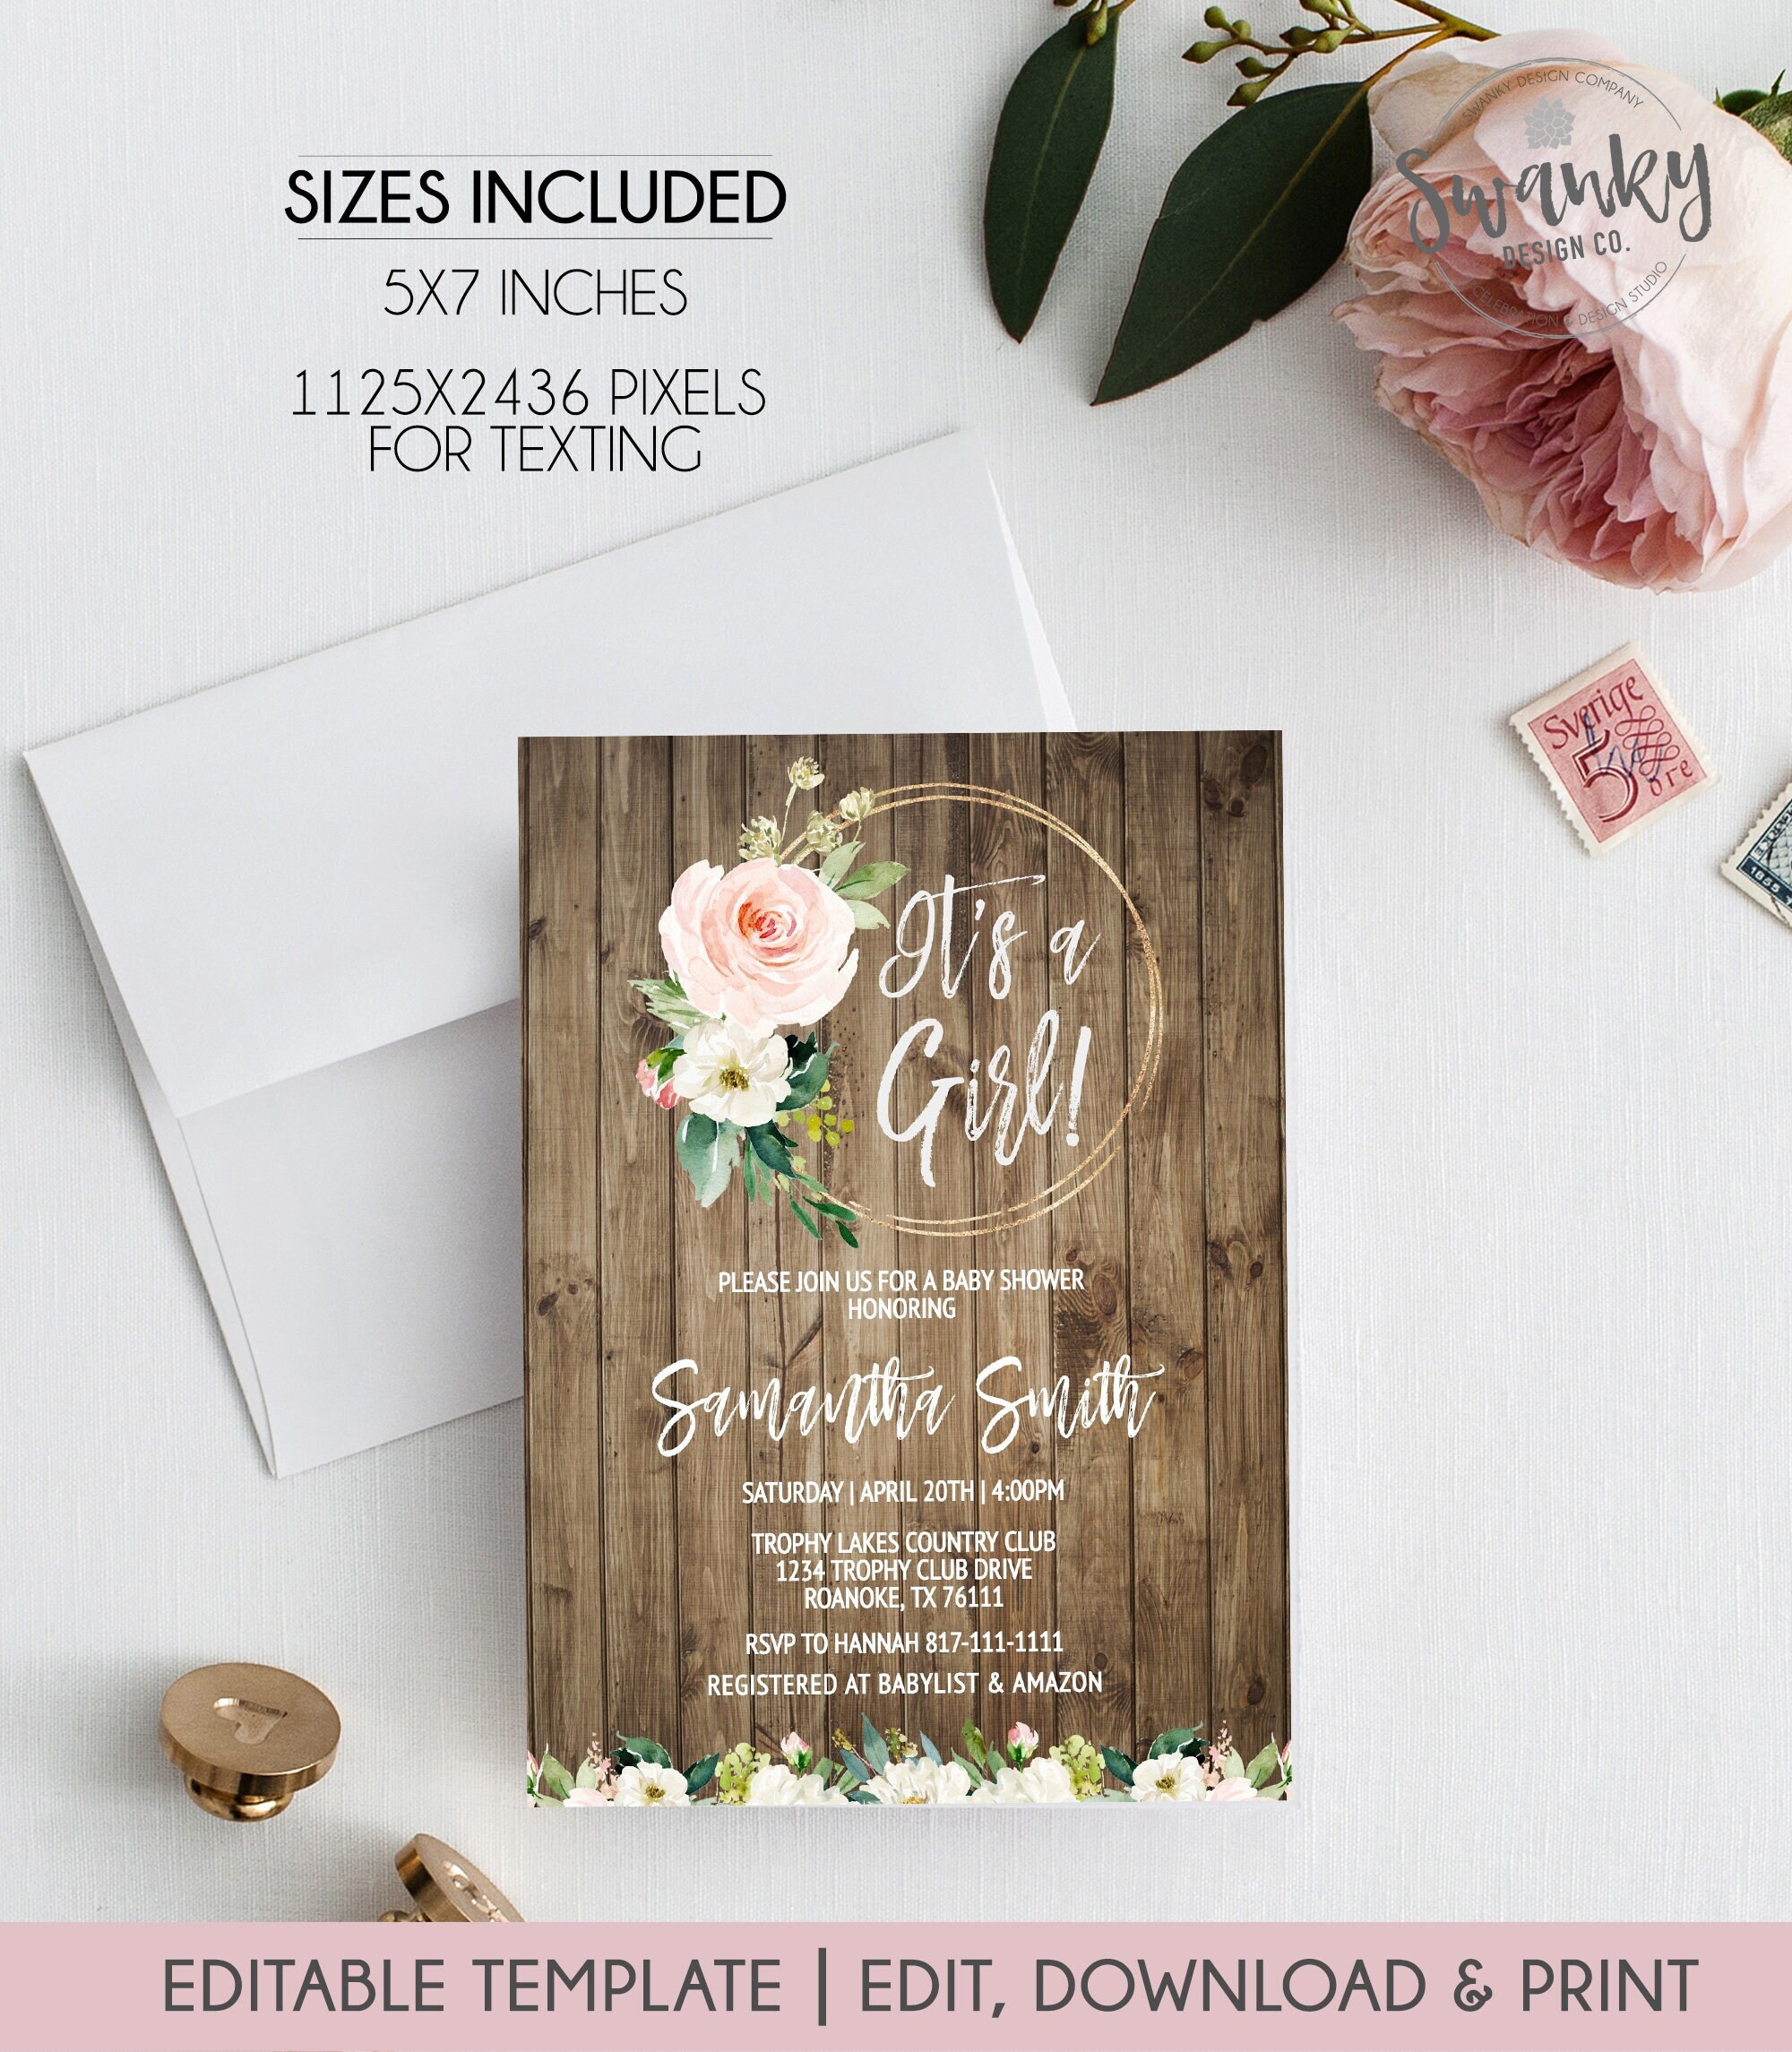 Free Printable Letters For Banners - Swanky Design Co.